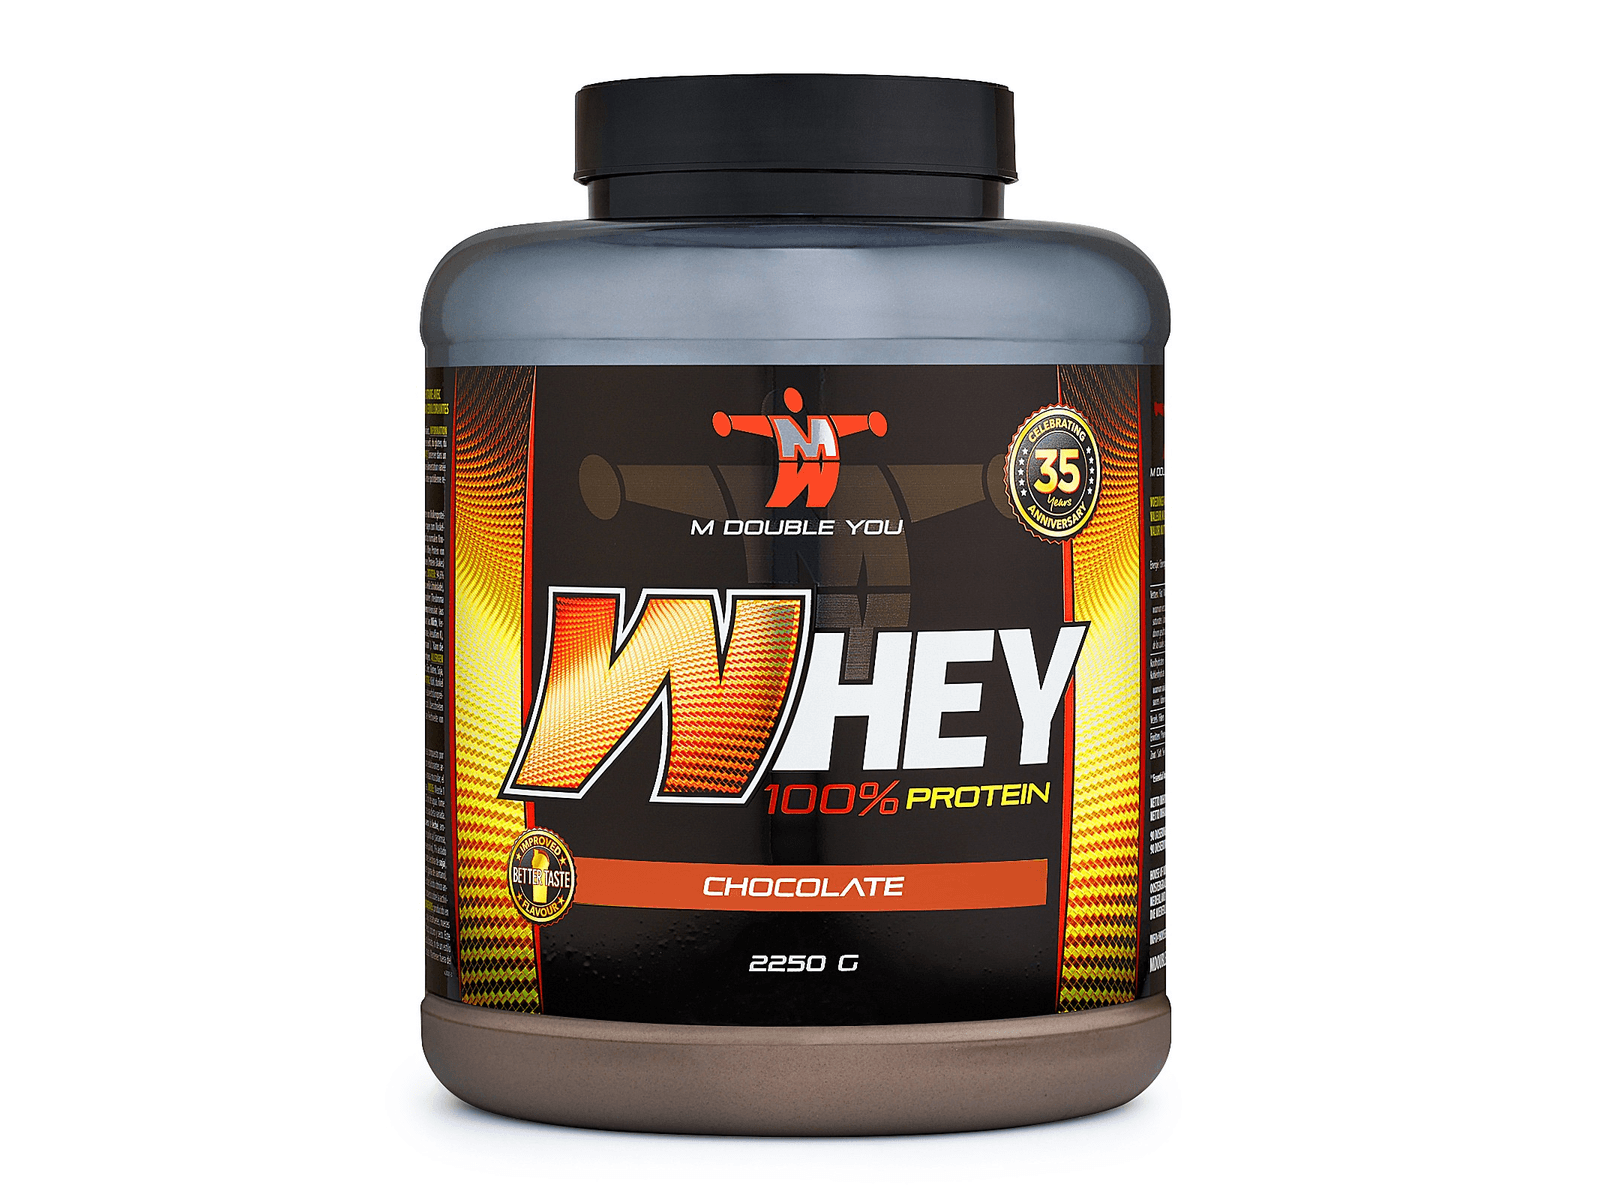 100% Whey Protein (Chocolate - 2250 gram) - M DOUBLE YOU